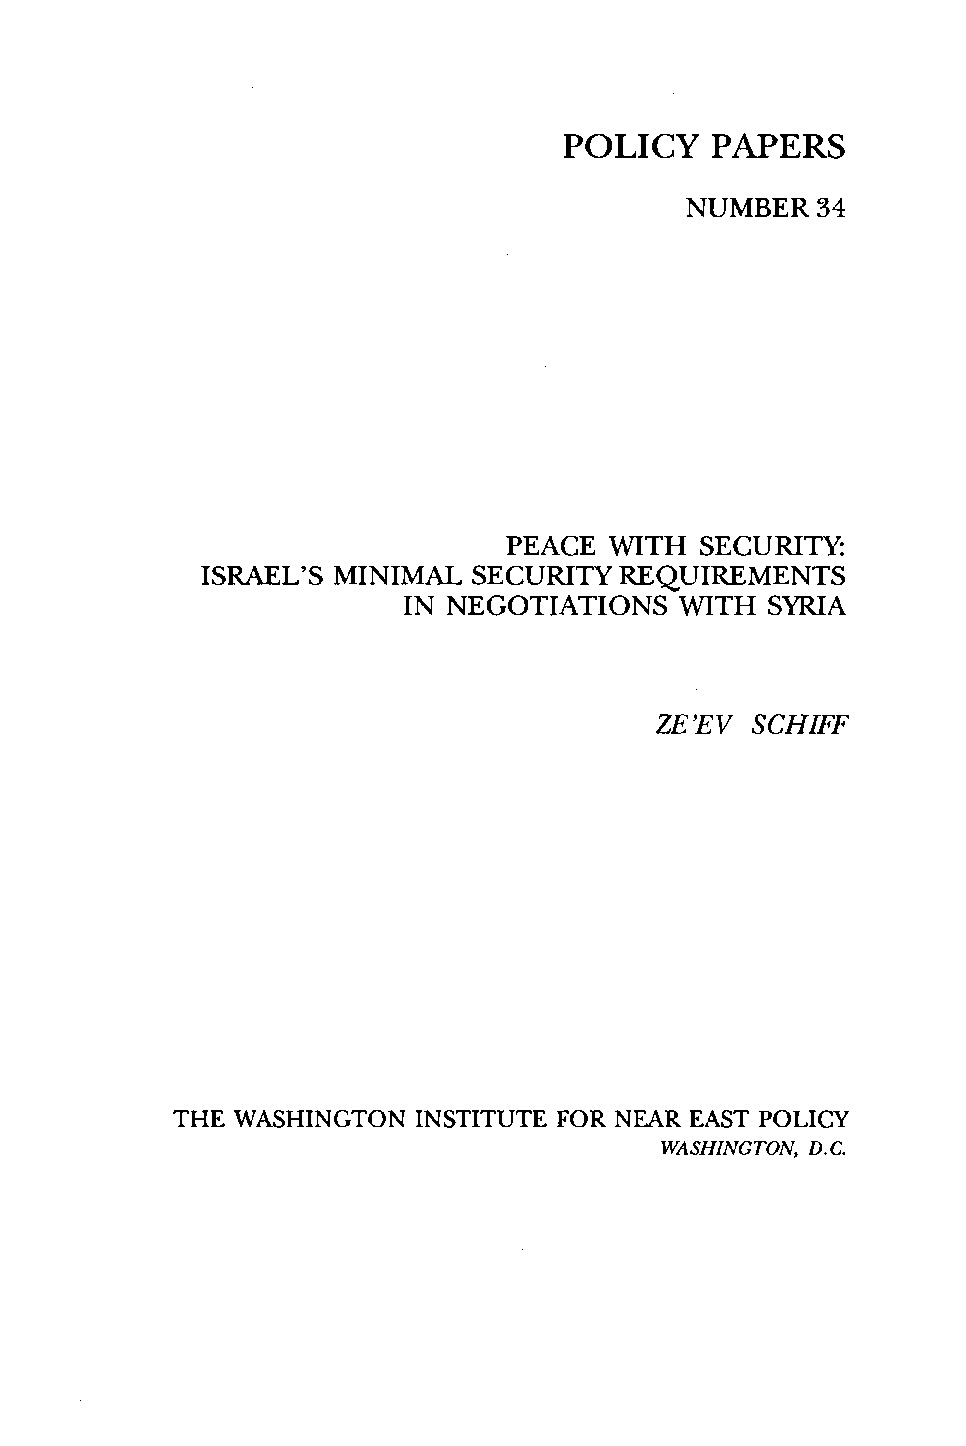 PP_34PeacewithSecurity.pdf